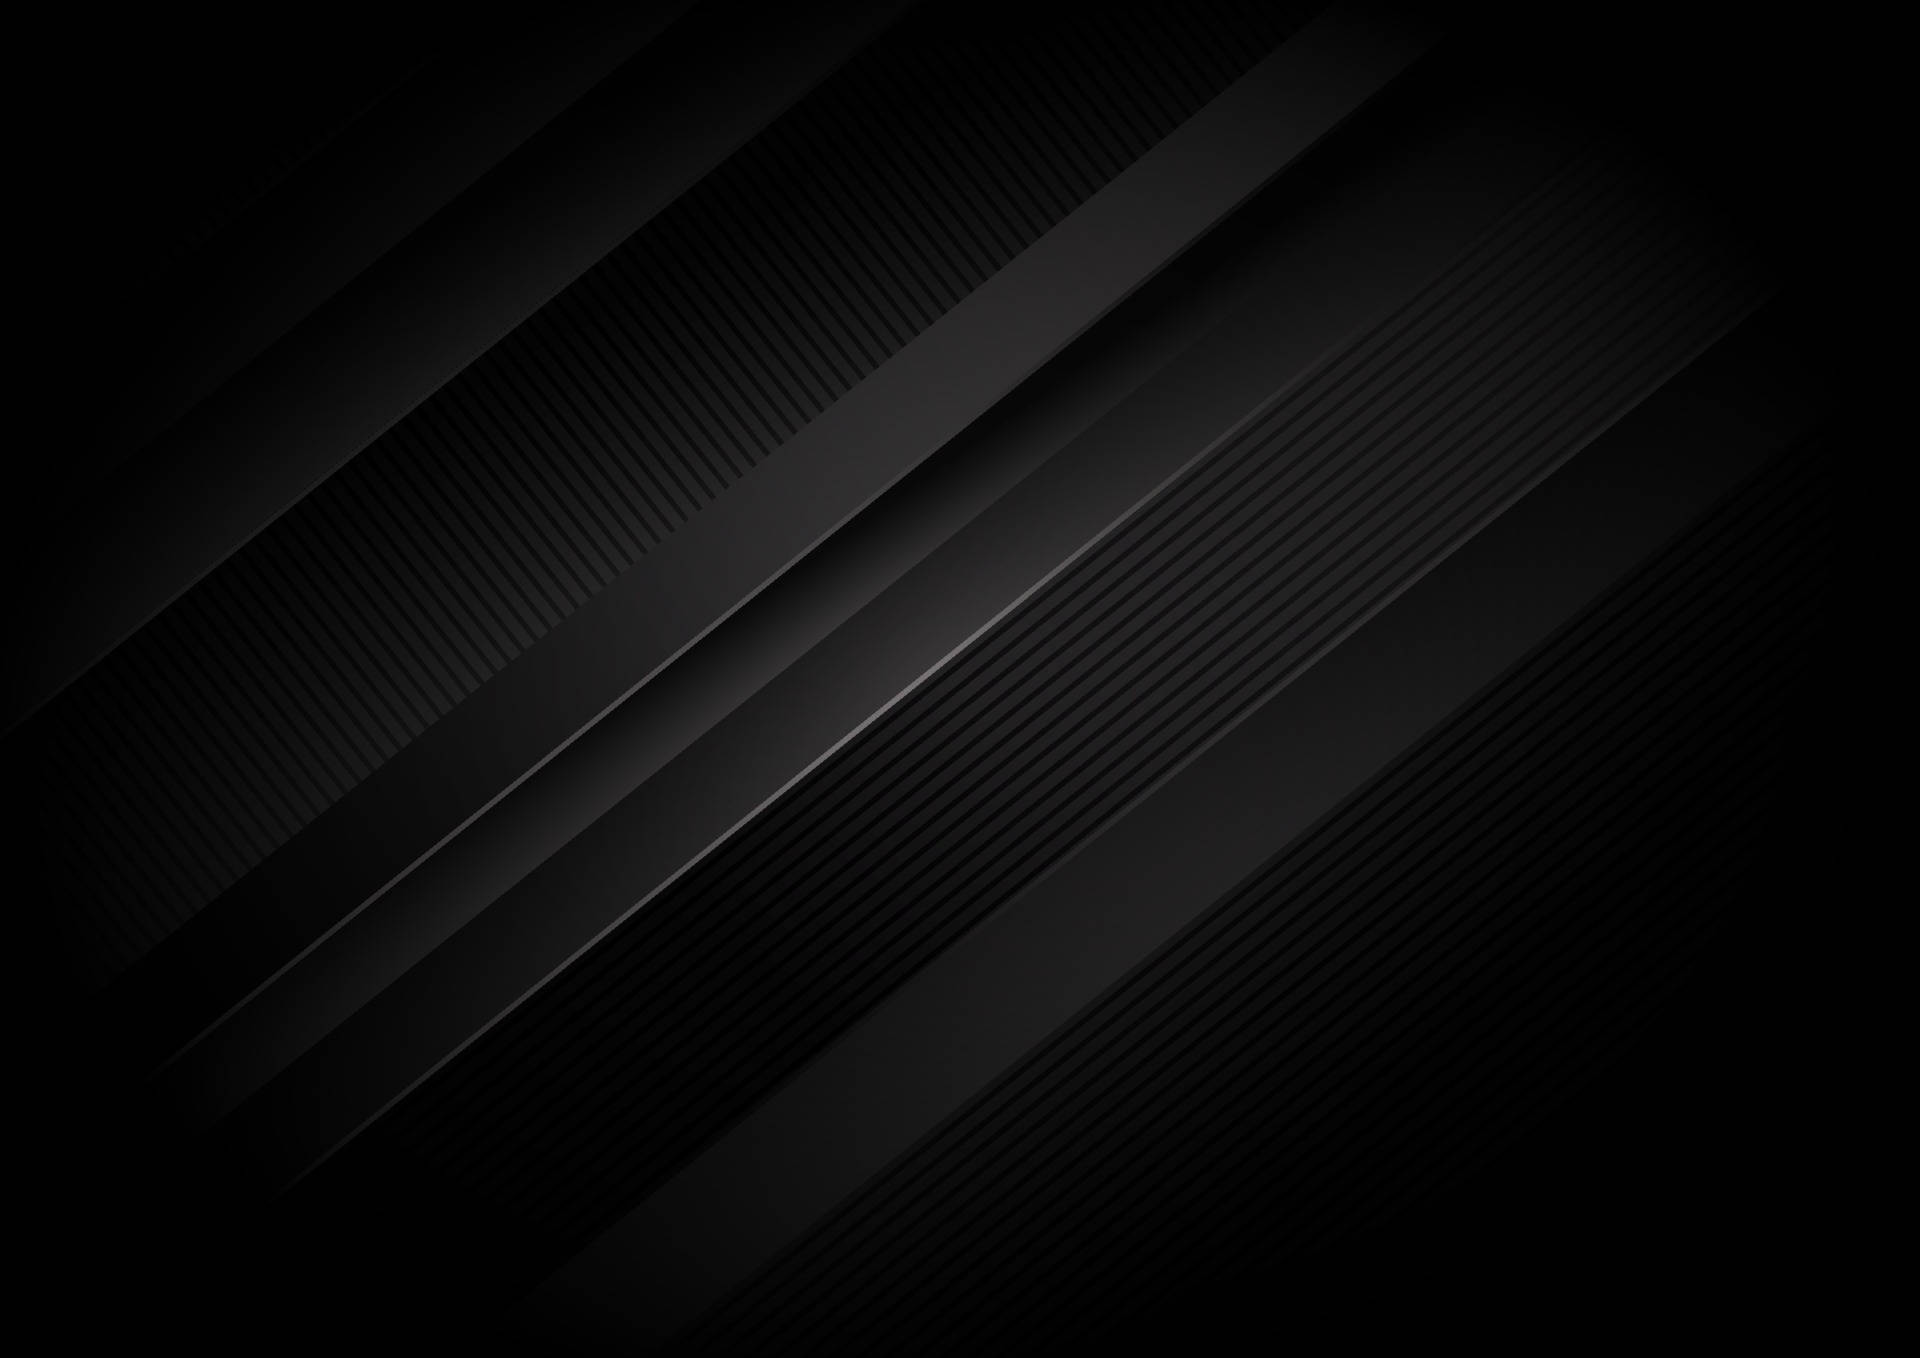 Black And White Striped Background Wallpaper